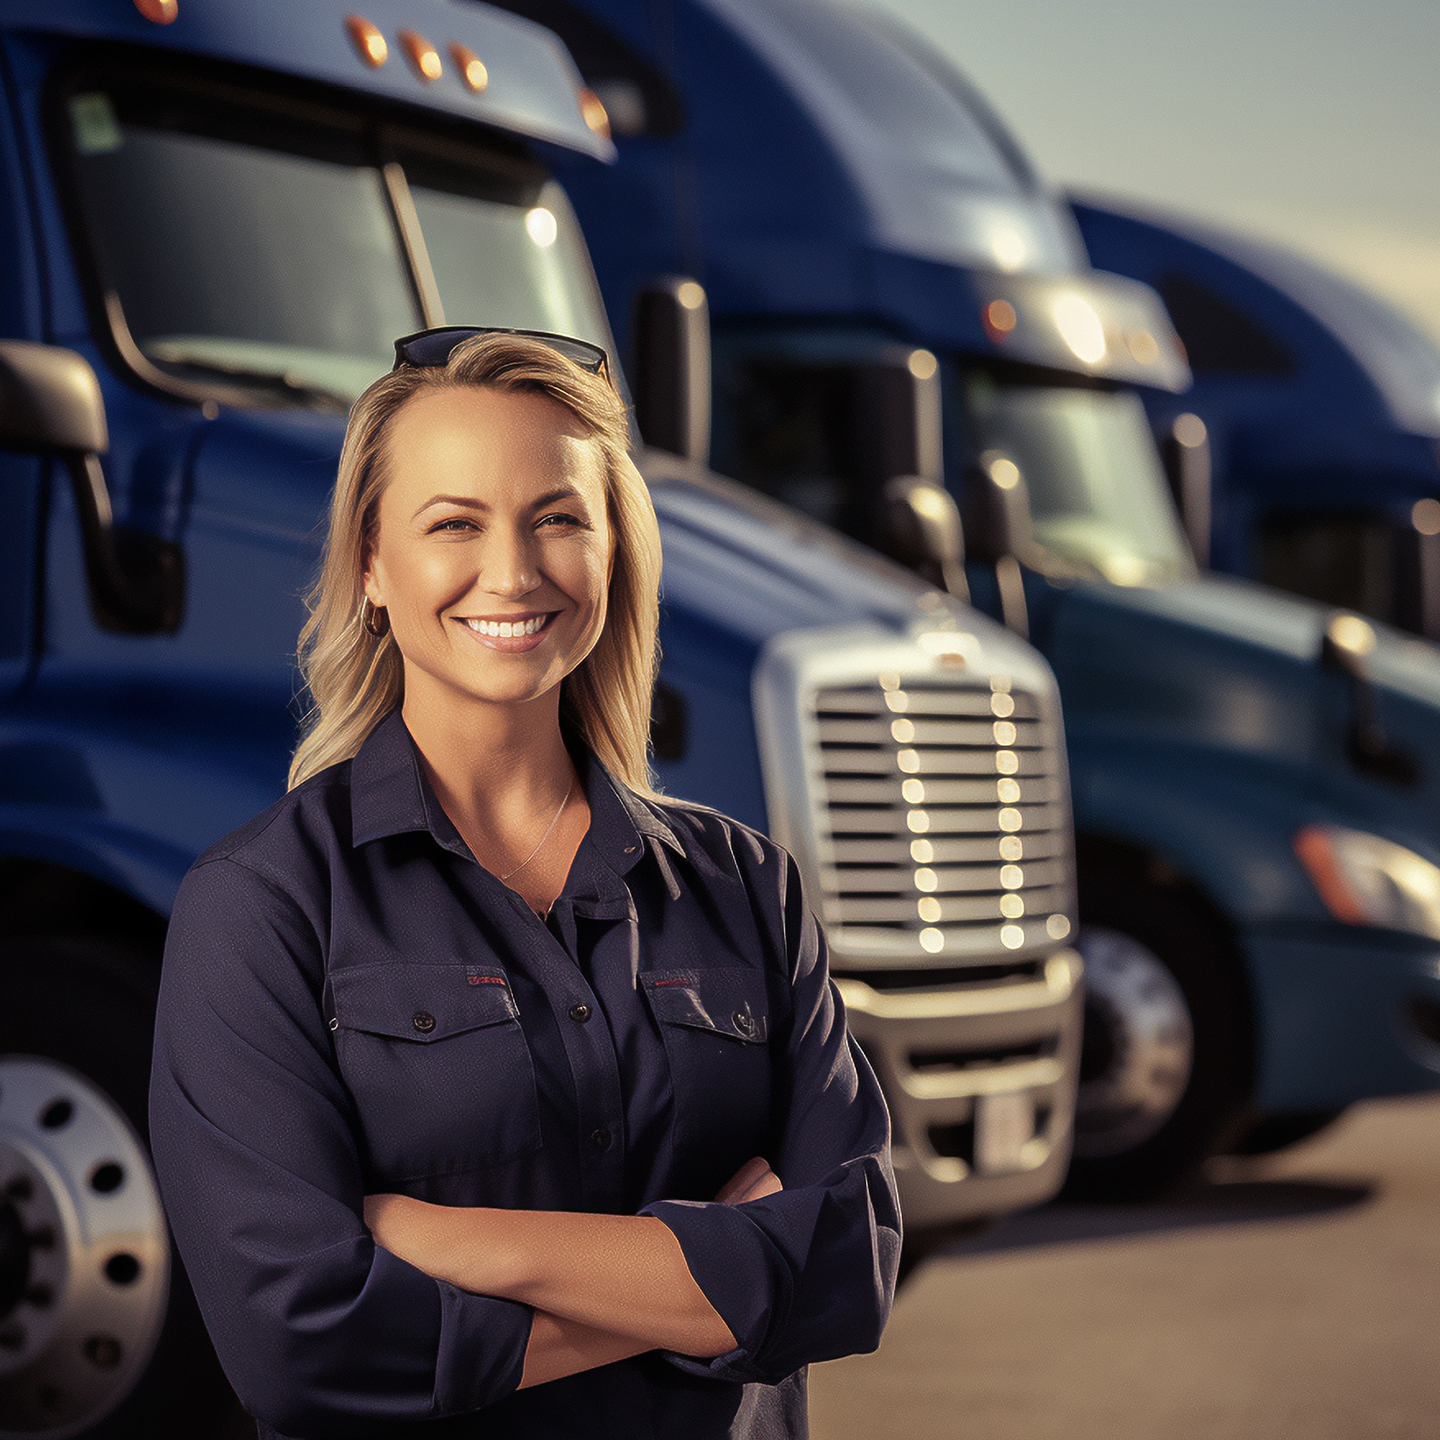 Recruiting student drivers is a great way for trucking companies to bring new talent into their teams.